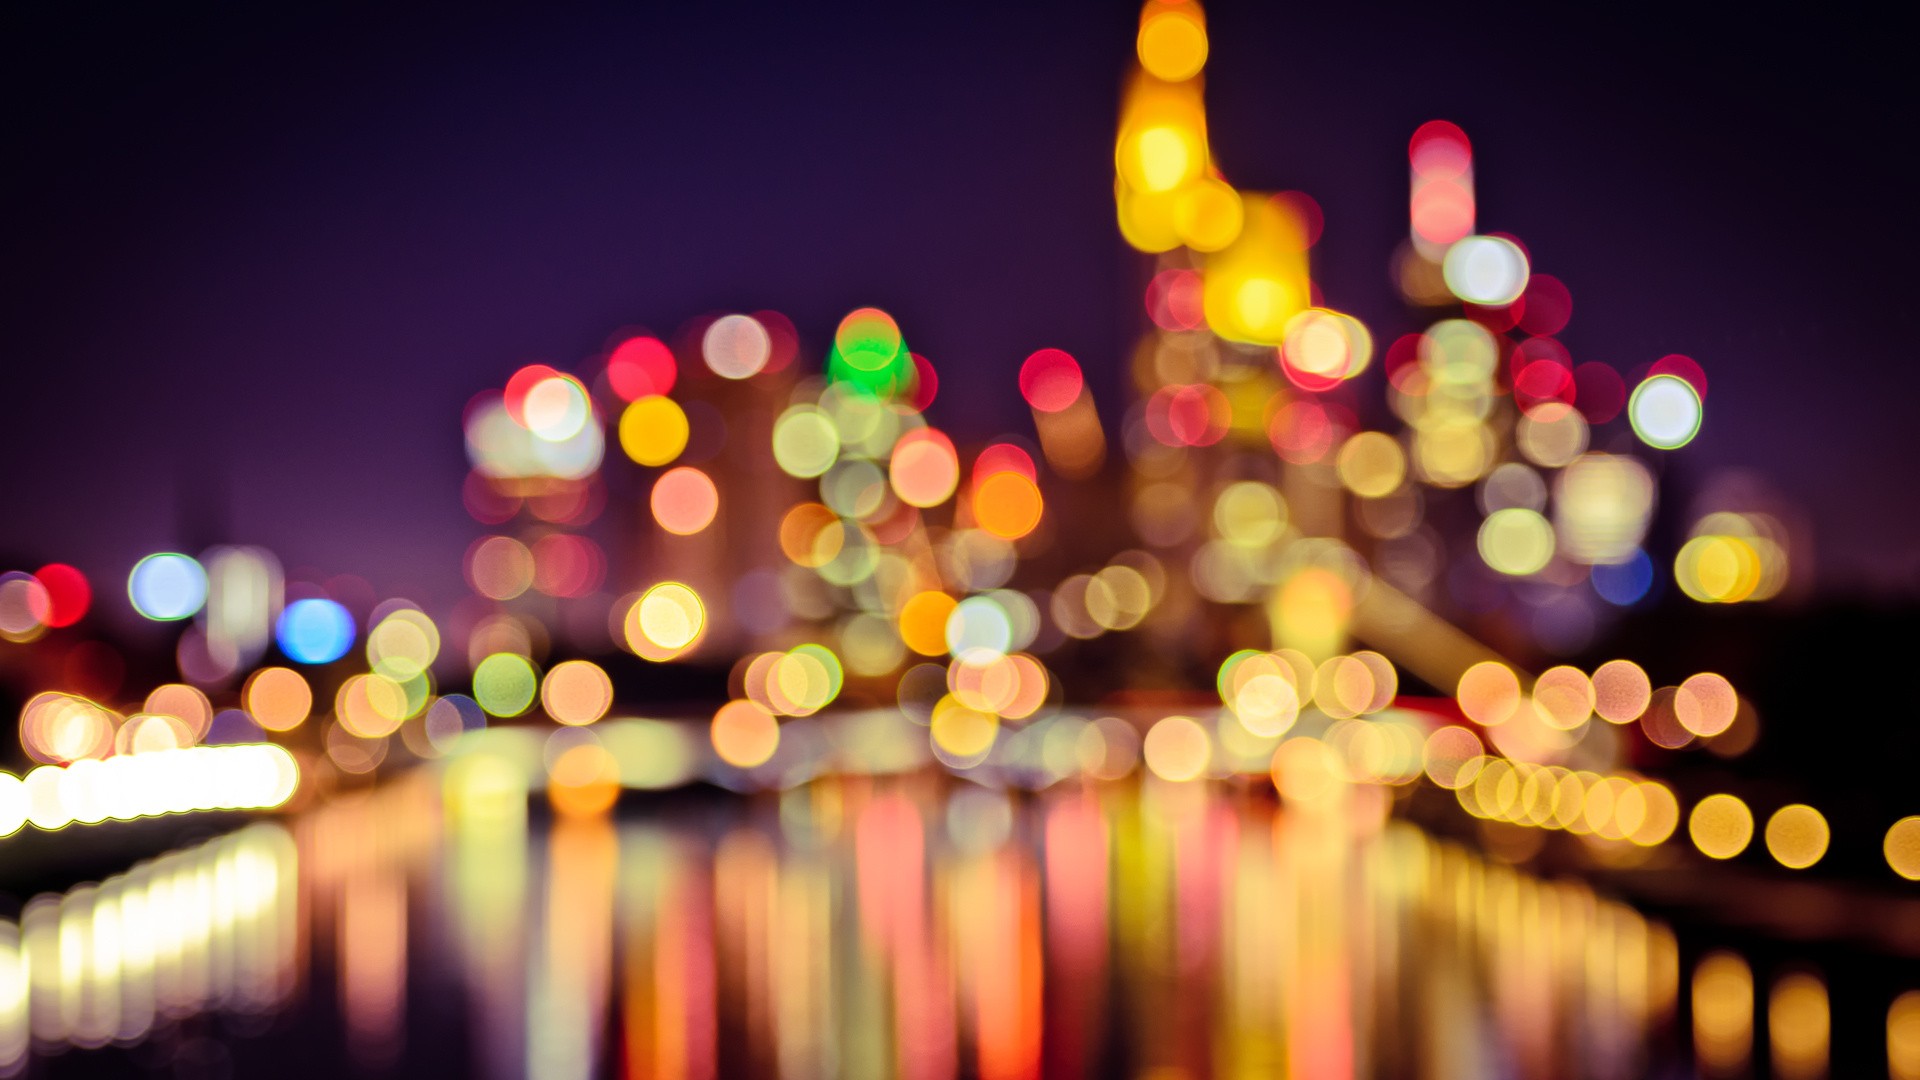 General 1920x1080 night bokeh Frankfurt Germany cityscape building blurred reflection water colorful circle low light